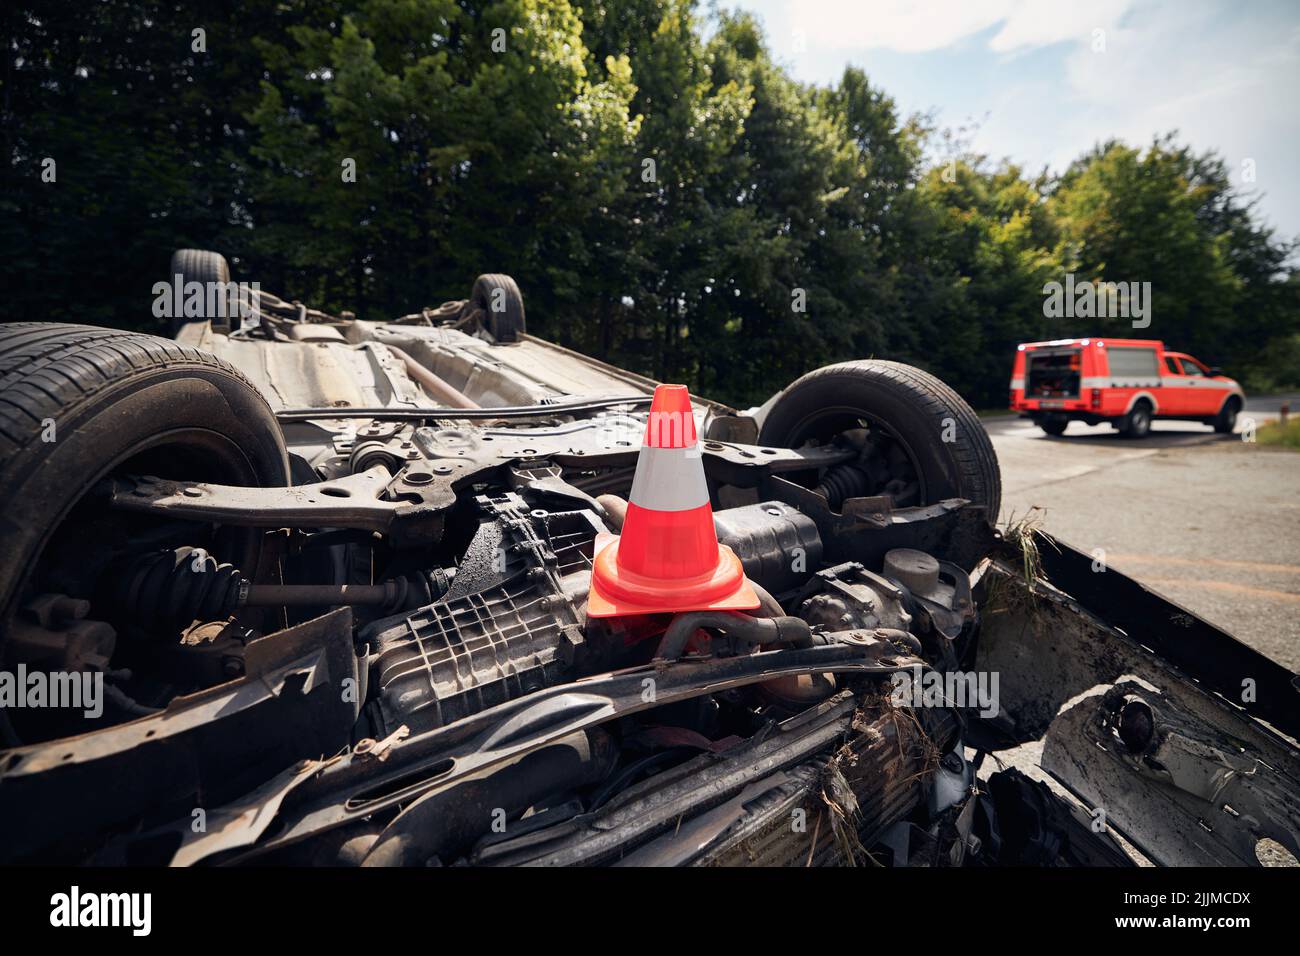 Damaged car on the roof after accident against fire rescue vehicle. Selective focus on traffic cone. Stock Photo